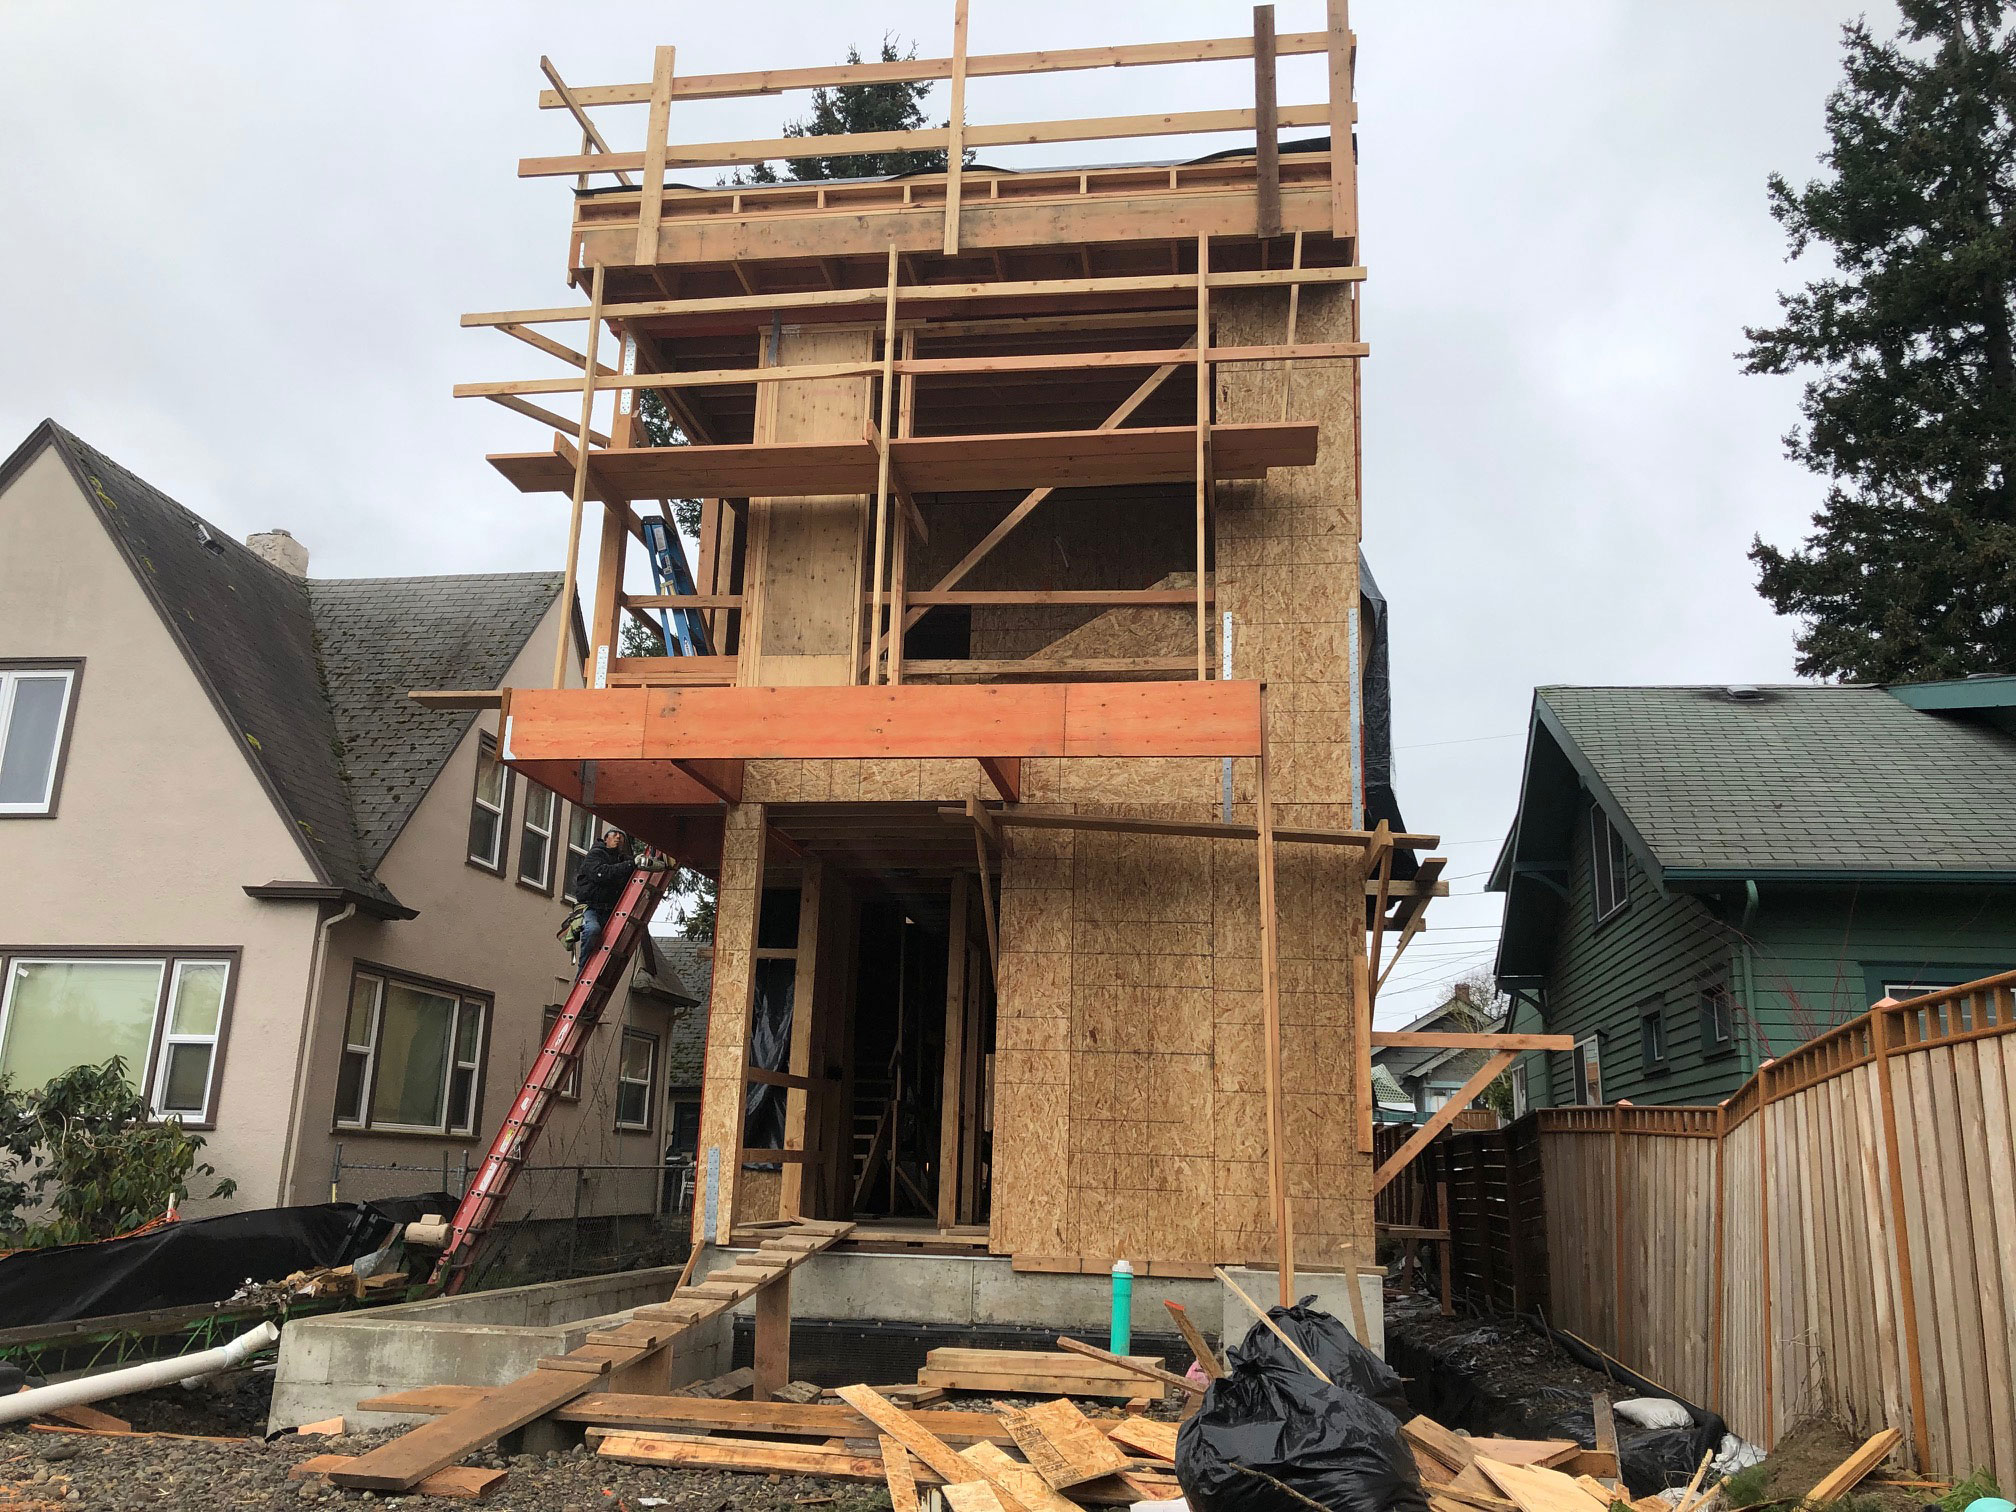 The construction of "infill" housing affects every part of town. Modifications of setbacks and height variances are changing the texture of our neighborhoods.  Photo: Morf Morford